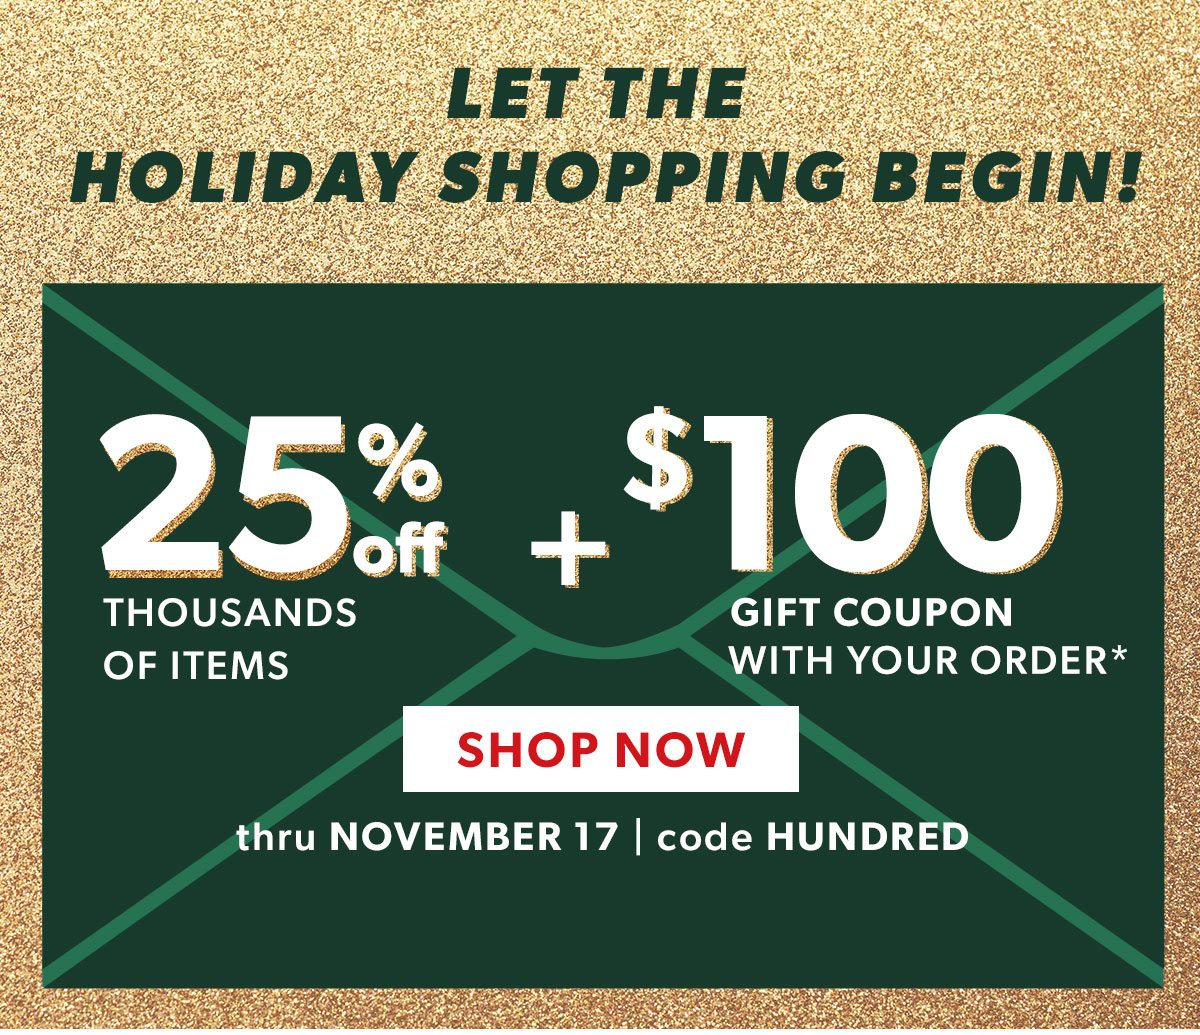 25% Off Thousands of Items + $100 Gift Coupon With Your Order. Shop Now